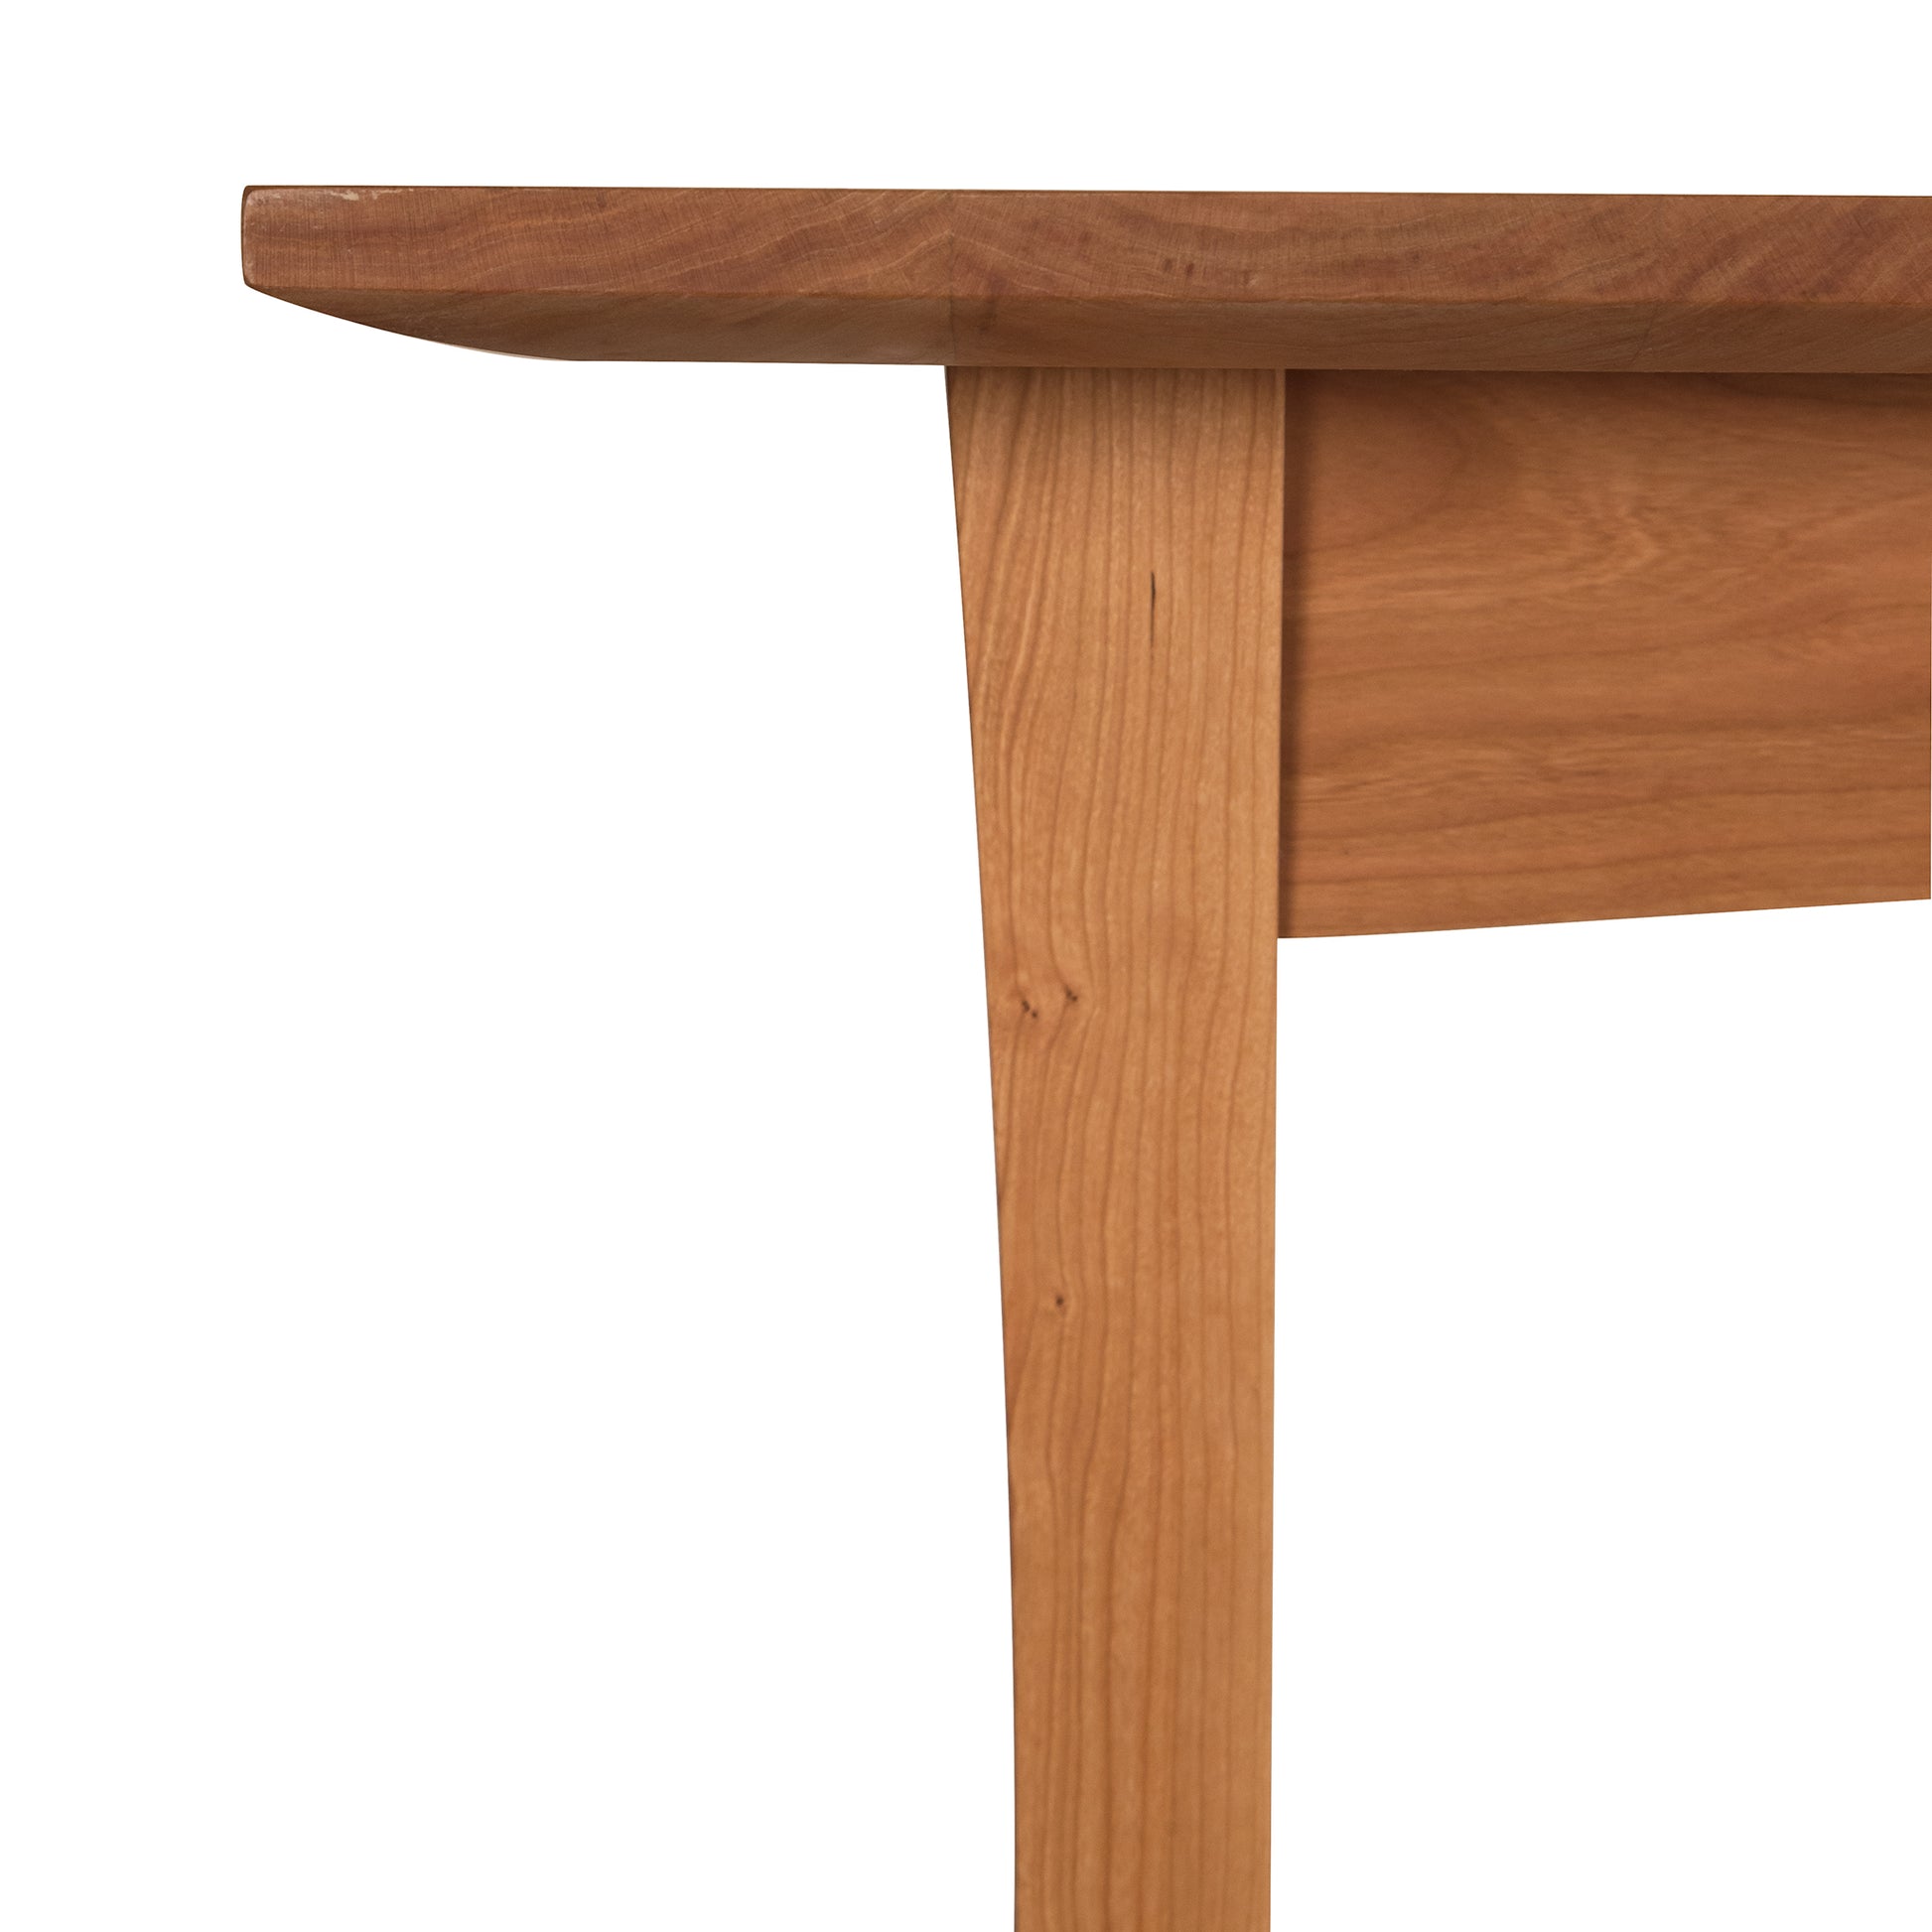 Vermont woodworkers crafted this Contemporary Craftsman Solid Top Dining Table from Vermont Furniture Designs, showcasing a wooden table corner that includes the tabletop and one leg against a white background.